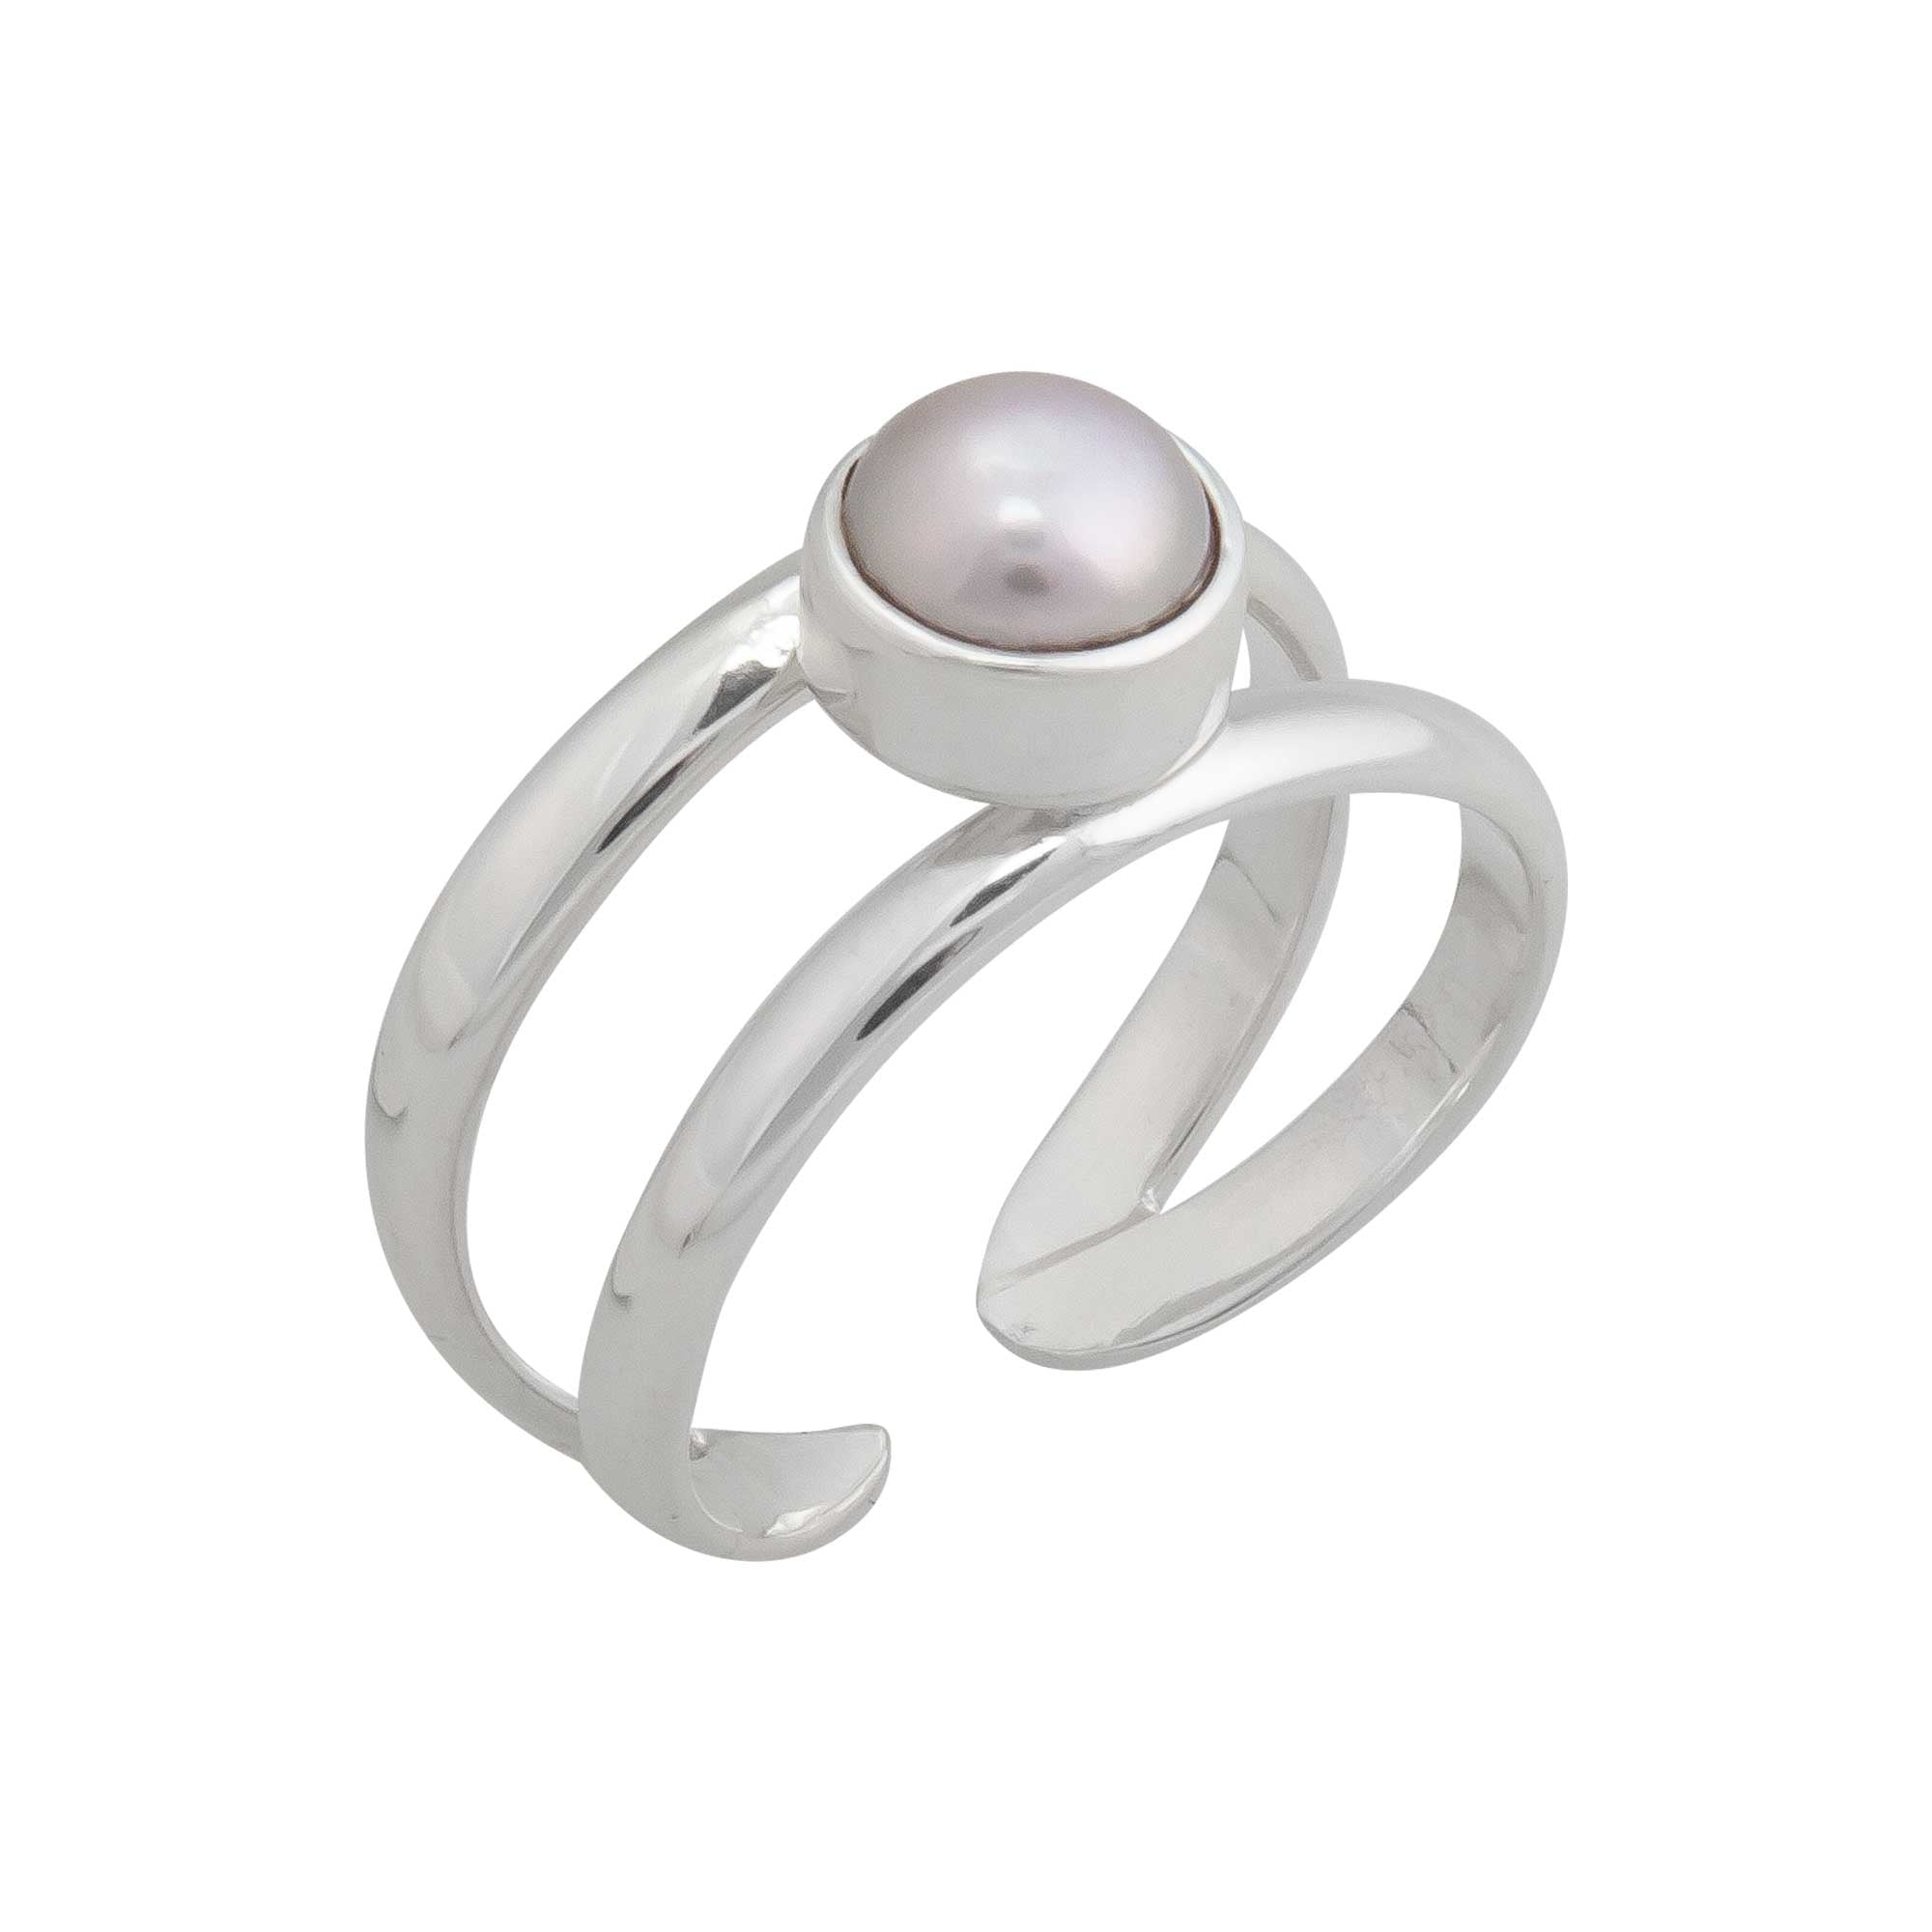 Silver Pearl Ring for Women/Girls